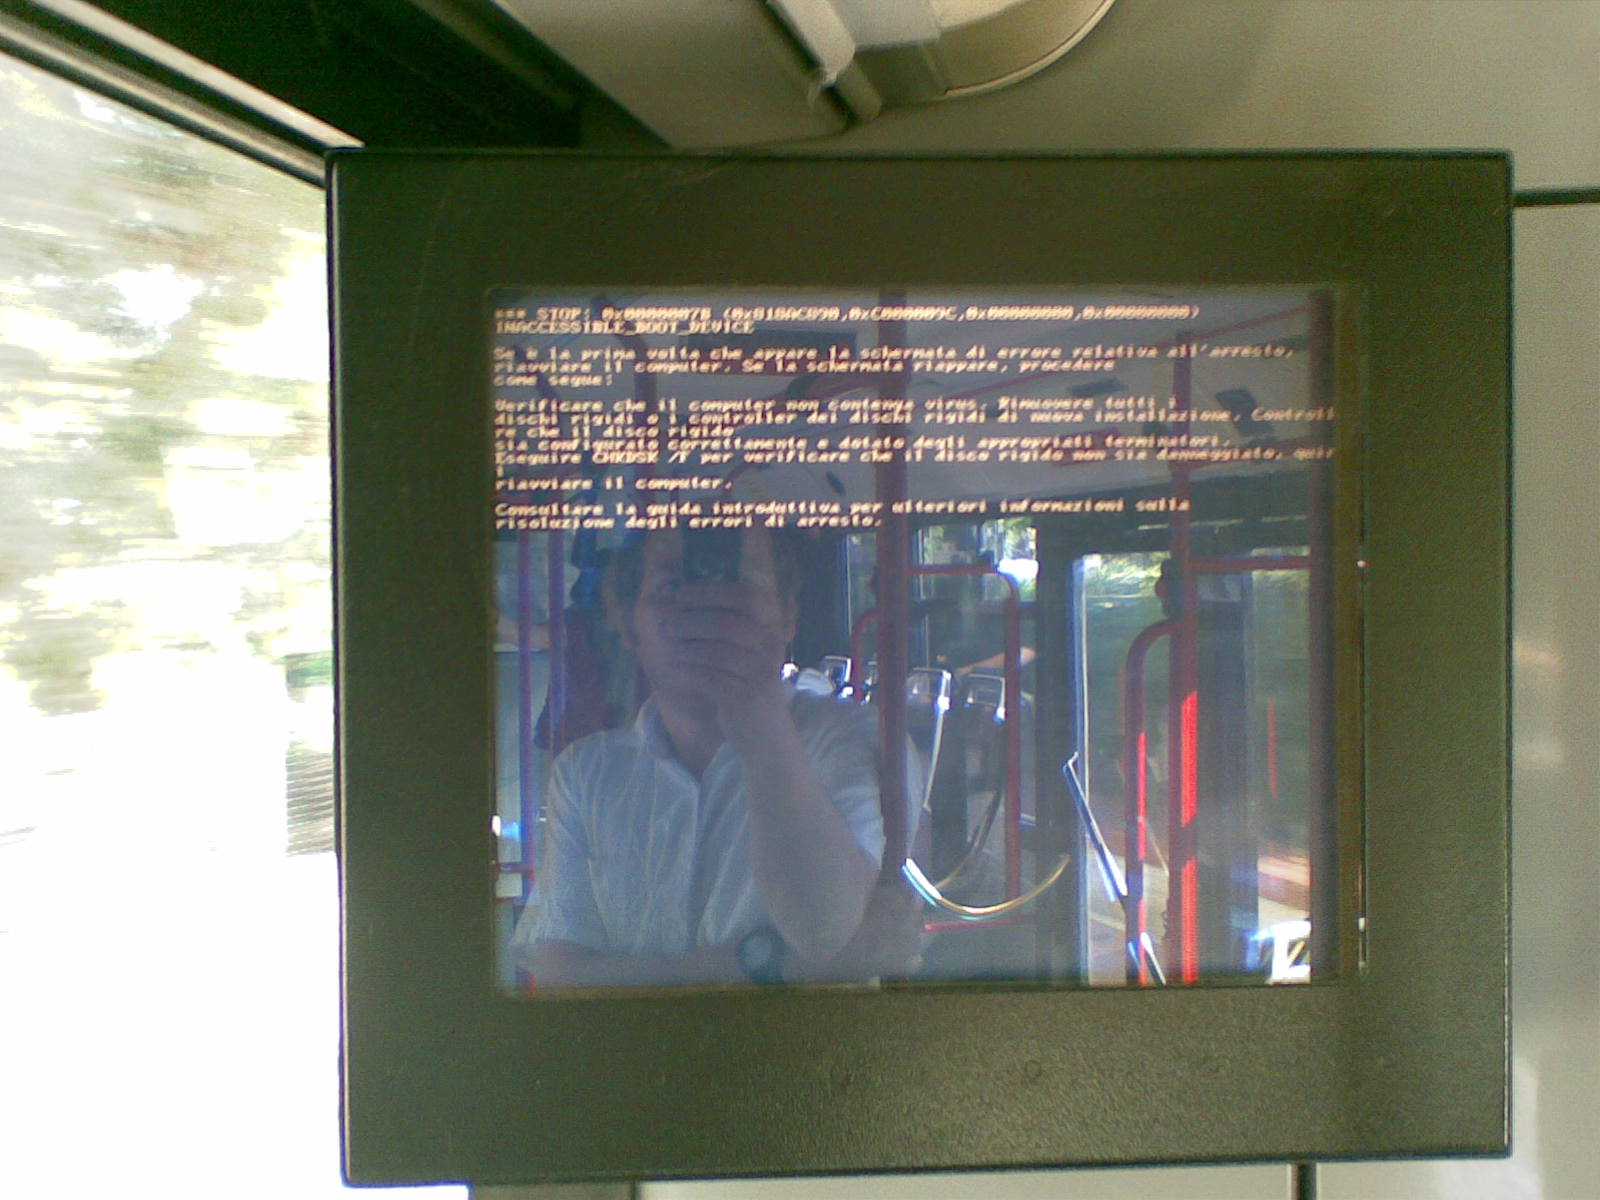 A computer screen displaying error messages.